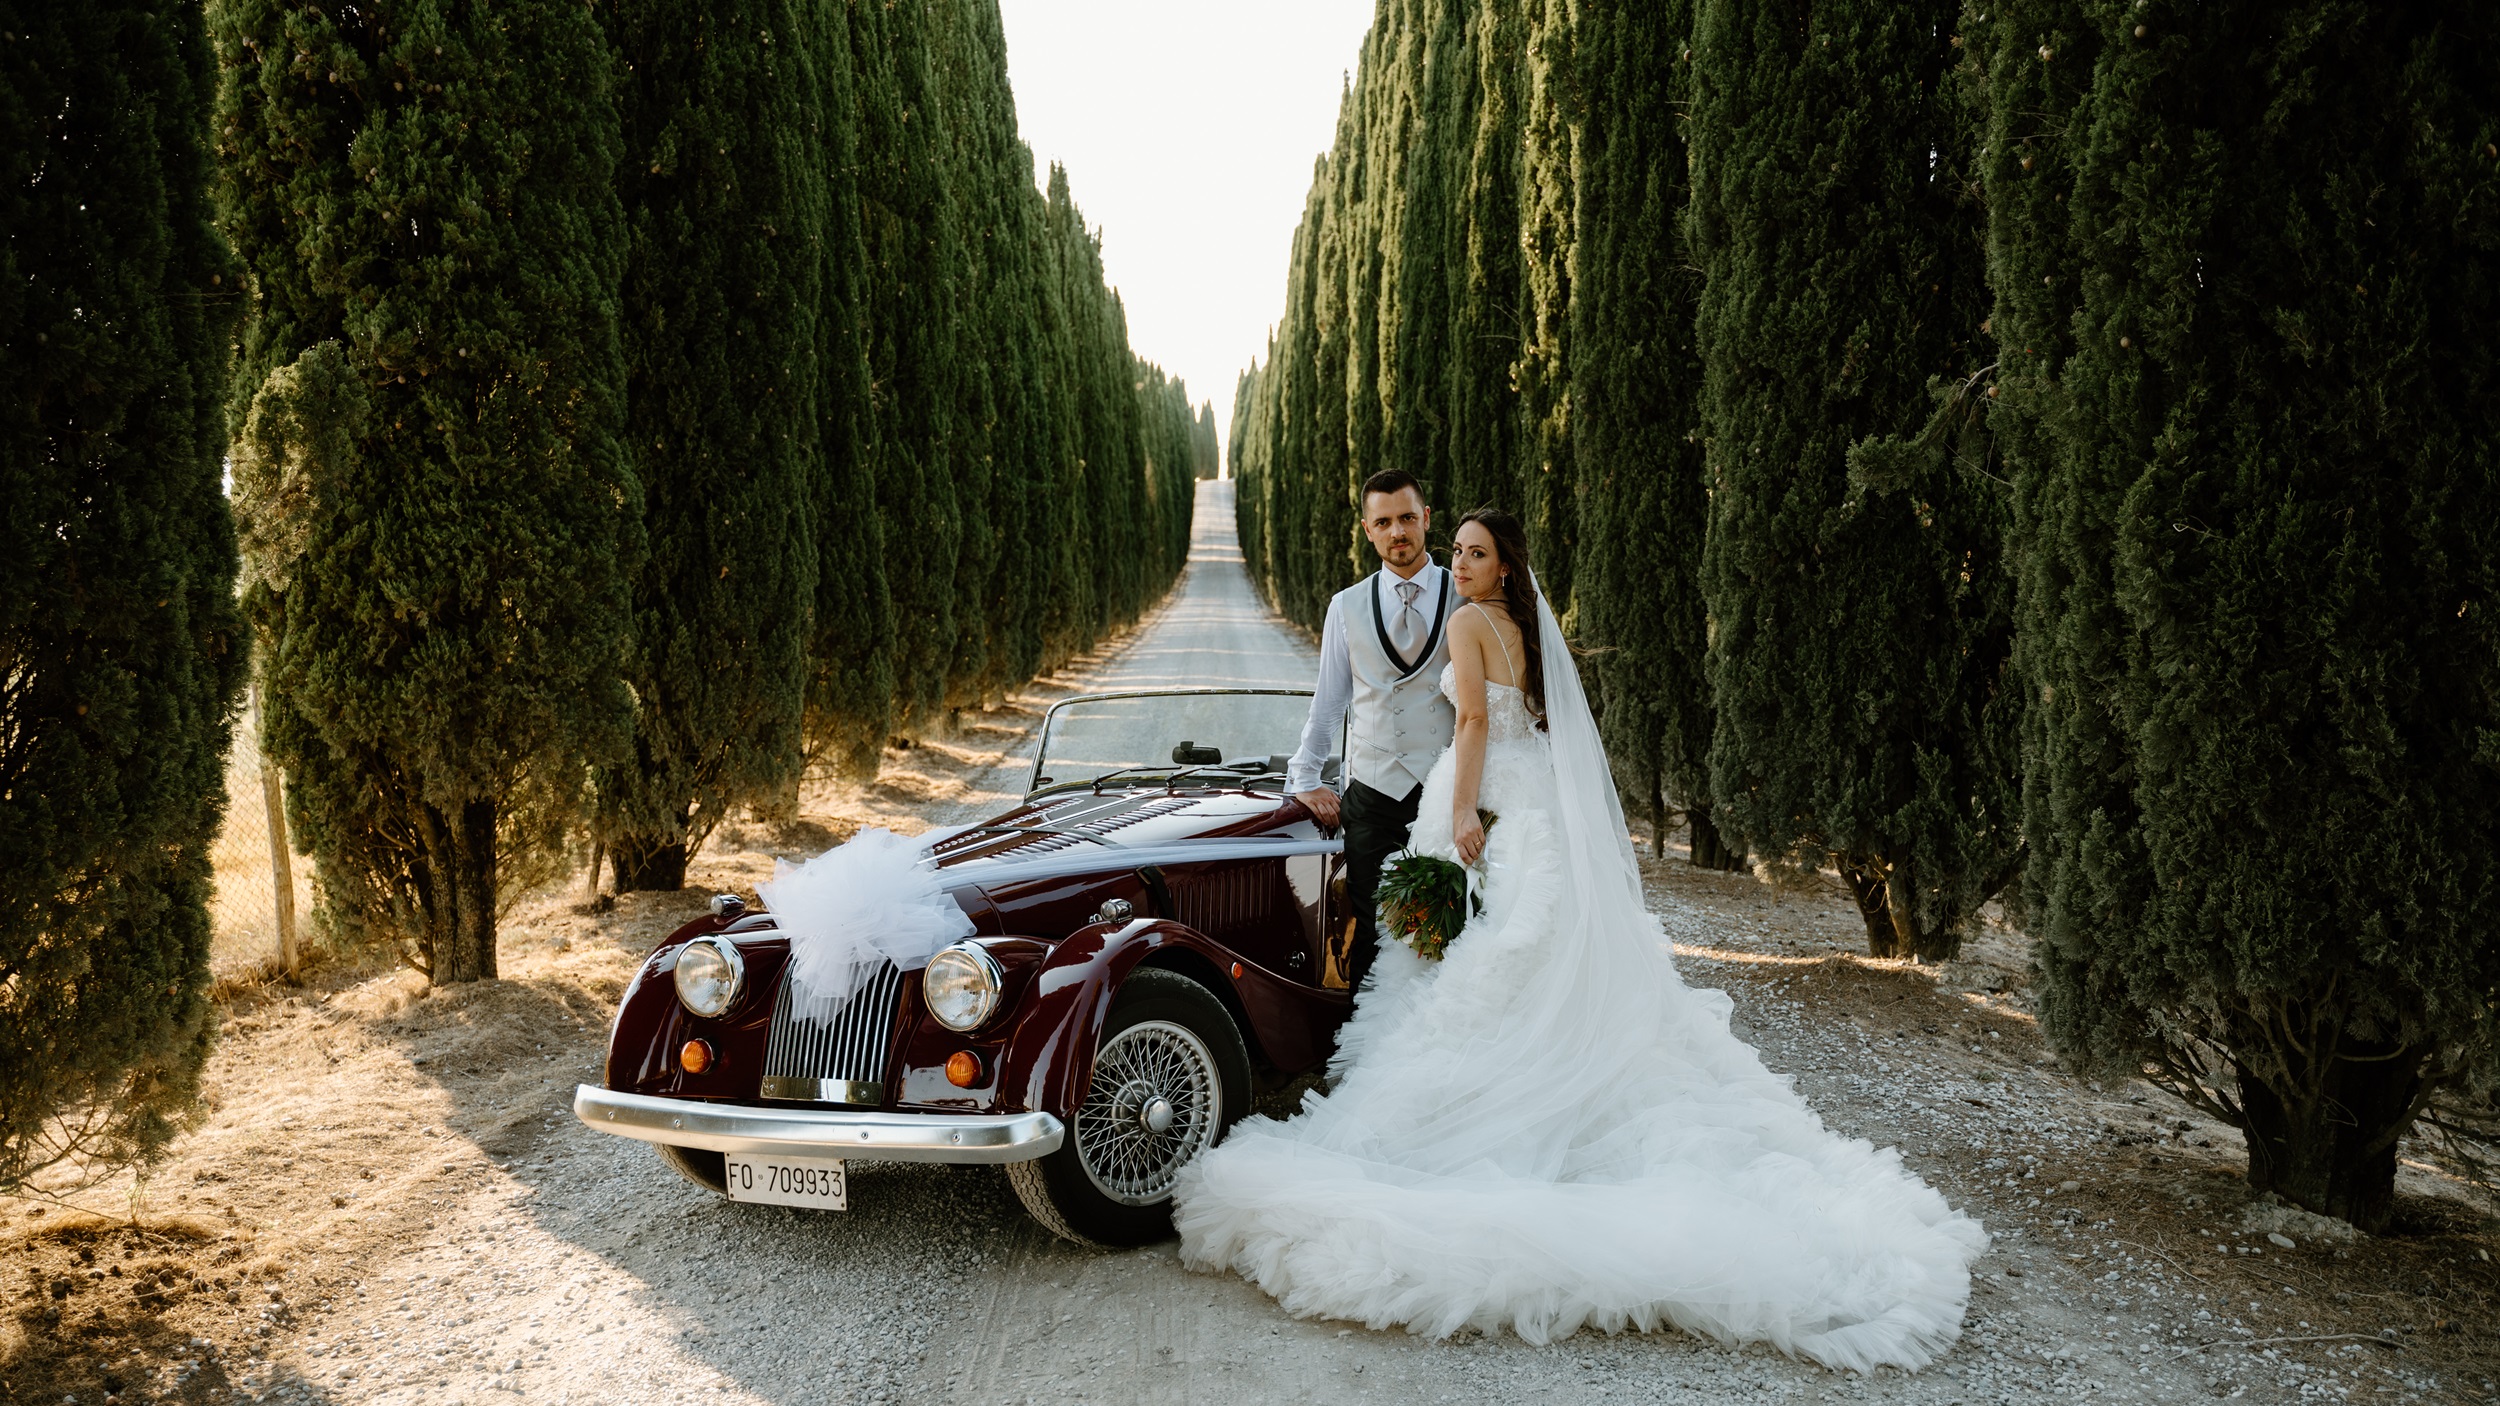 Wedding photography by Stefano Destro is for the wildly in love